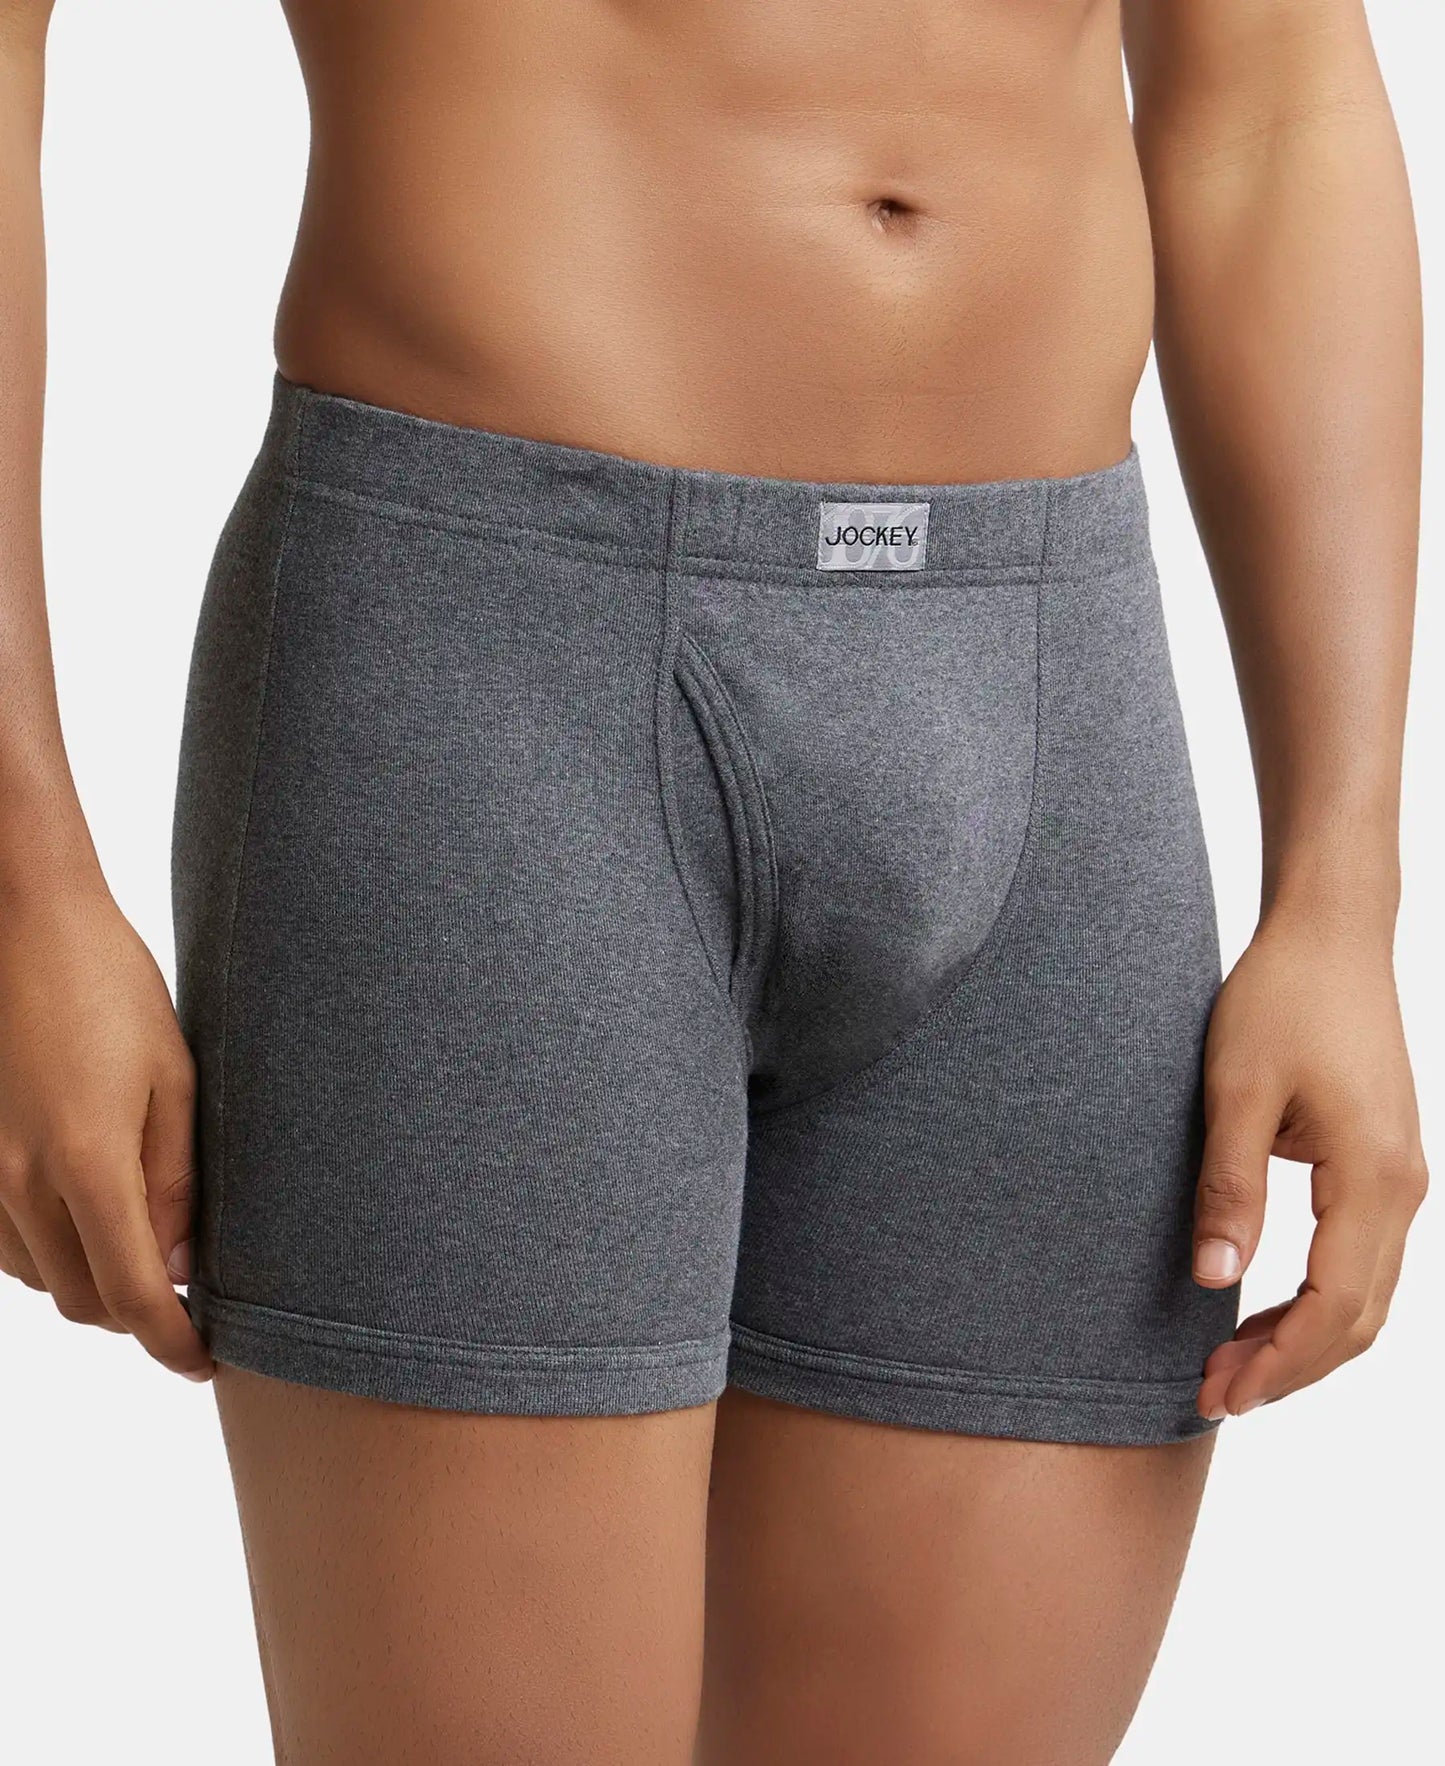 Super Combed Cotton Rib Solid Boxer Brief with Ultrasoft and Durable Waistband - Charcoal Melange-3